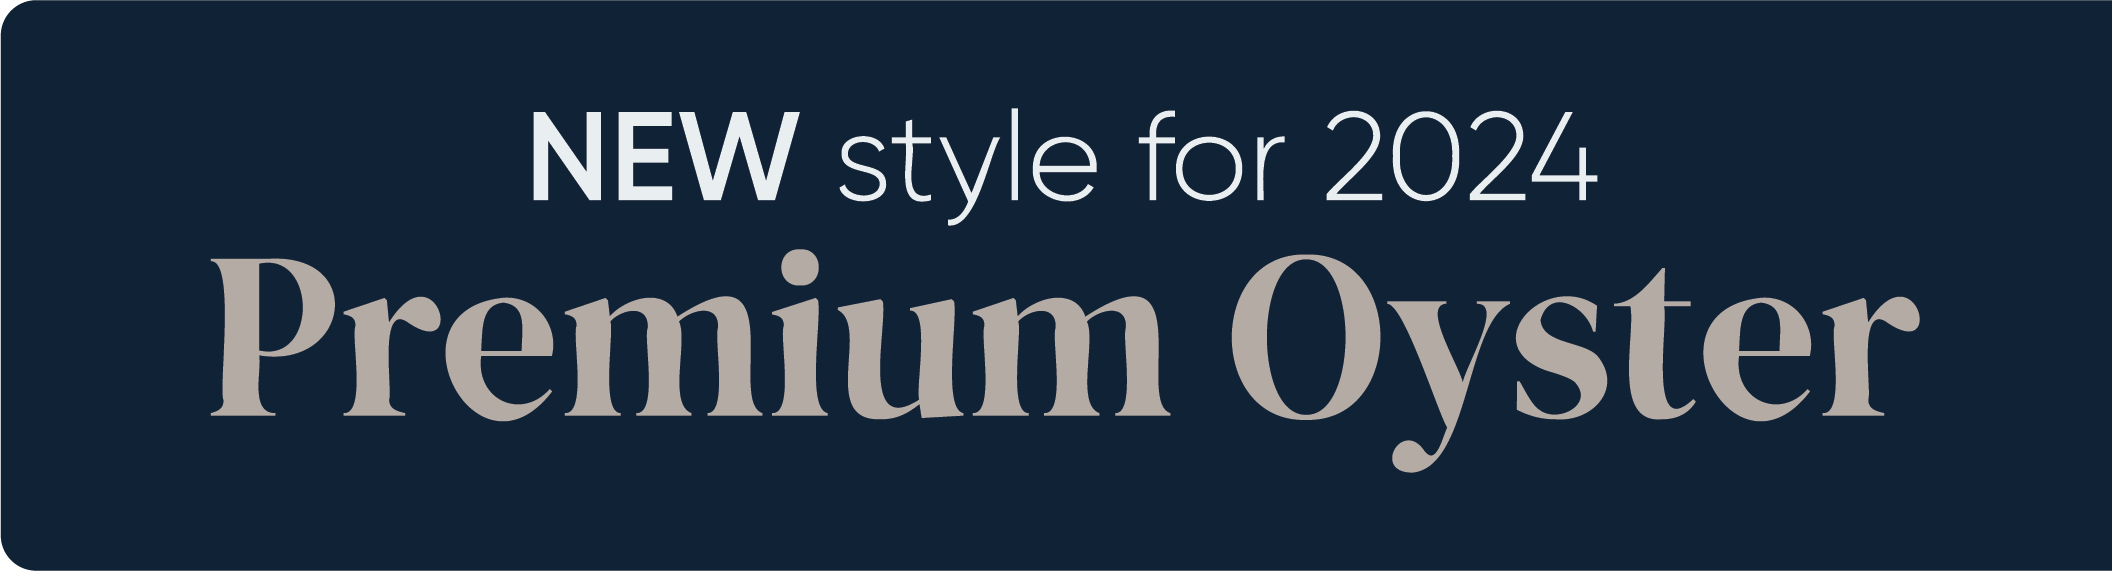 New style for 2024 premium oyster